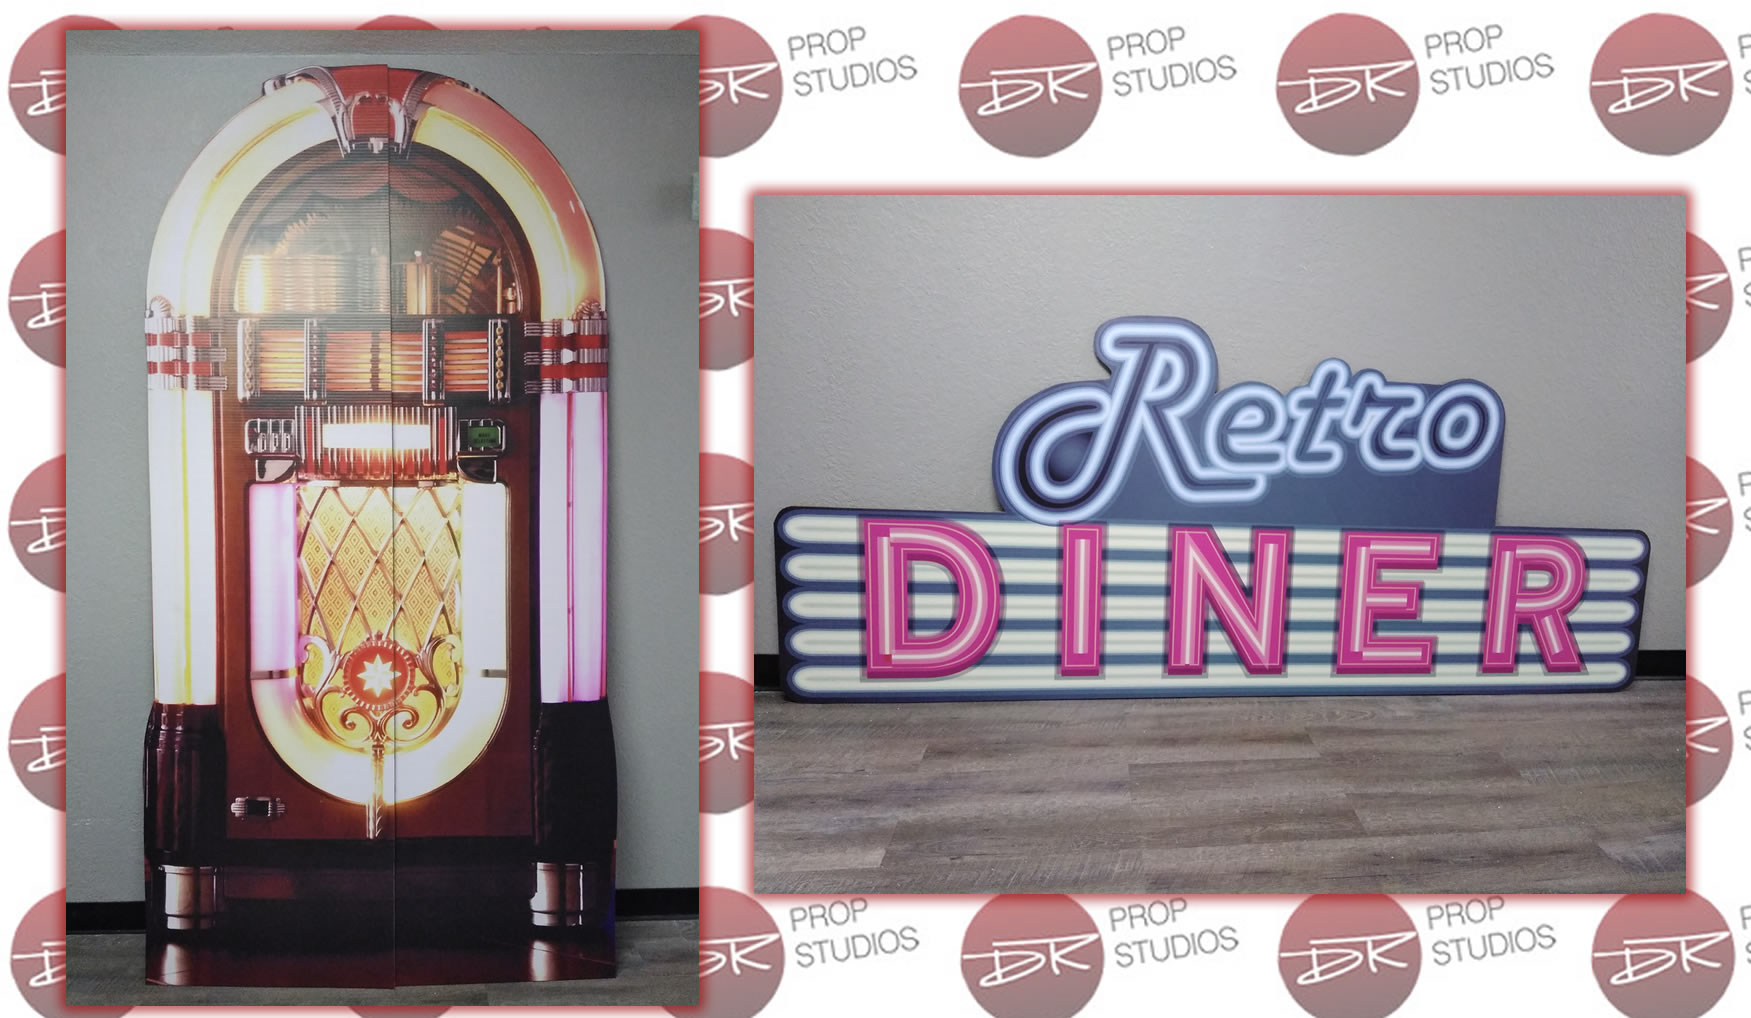 1950s Jukebox and Retro Diner Cardboard Cutout Standup Props for parties and events